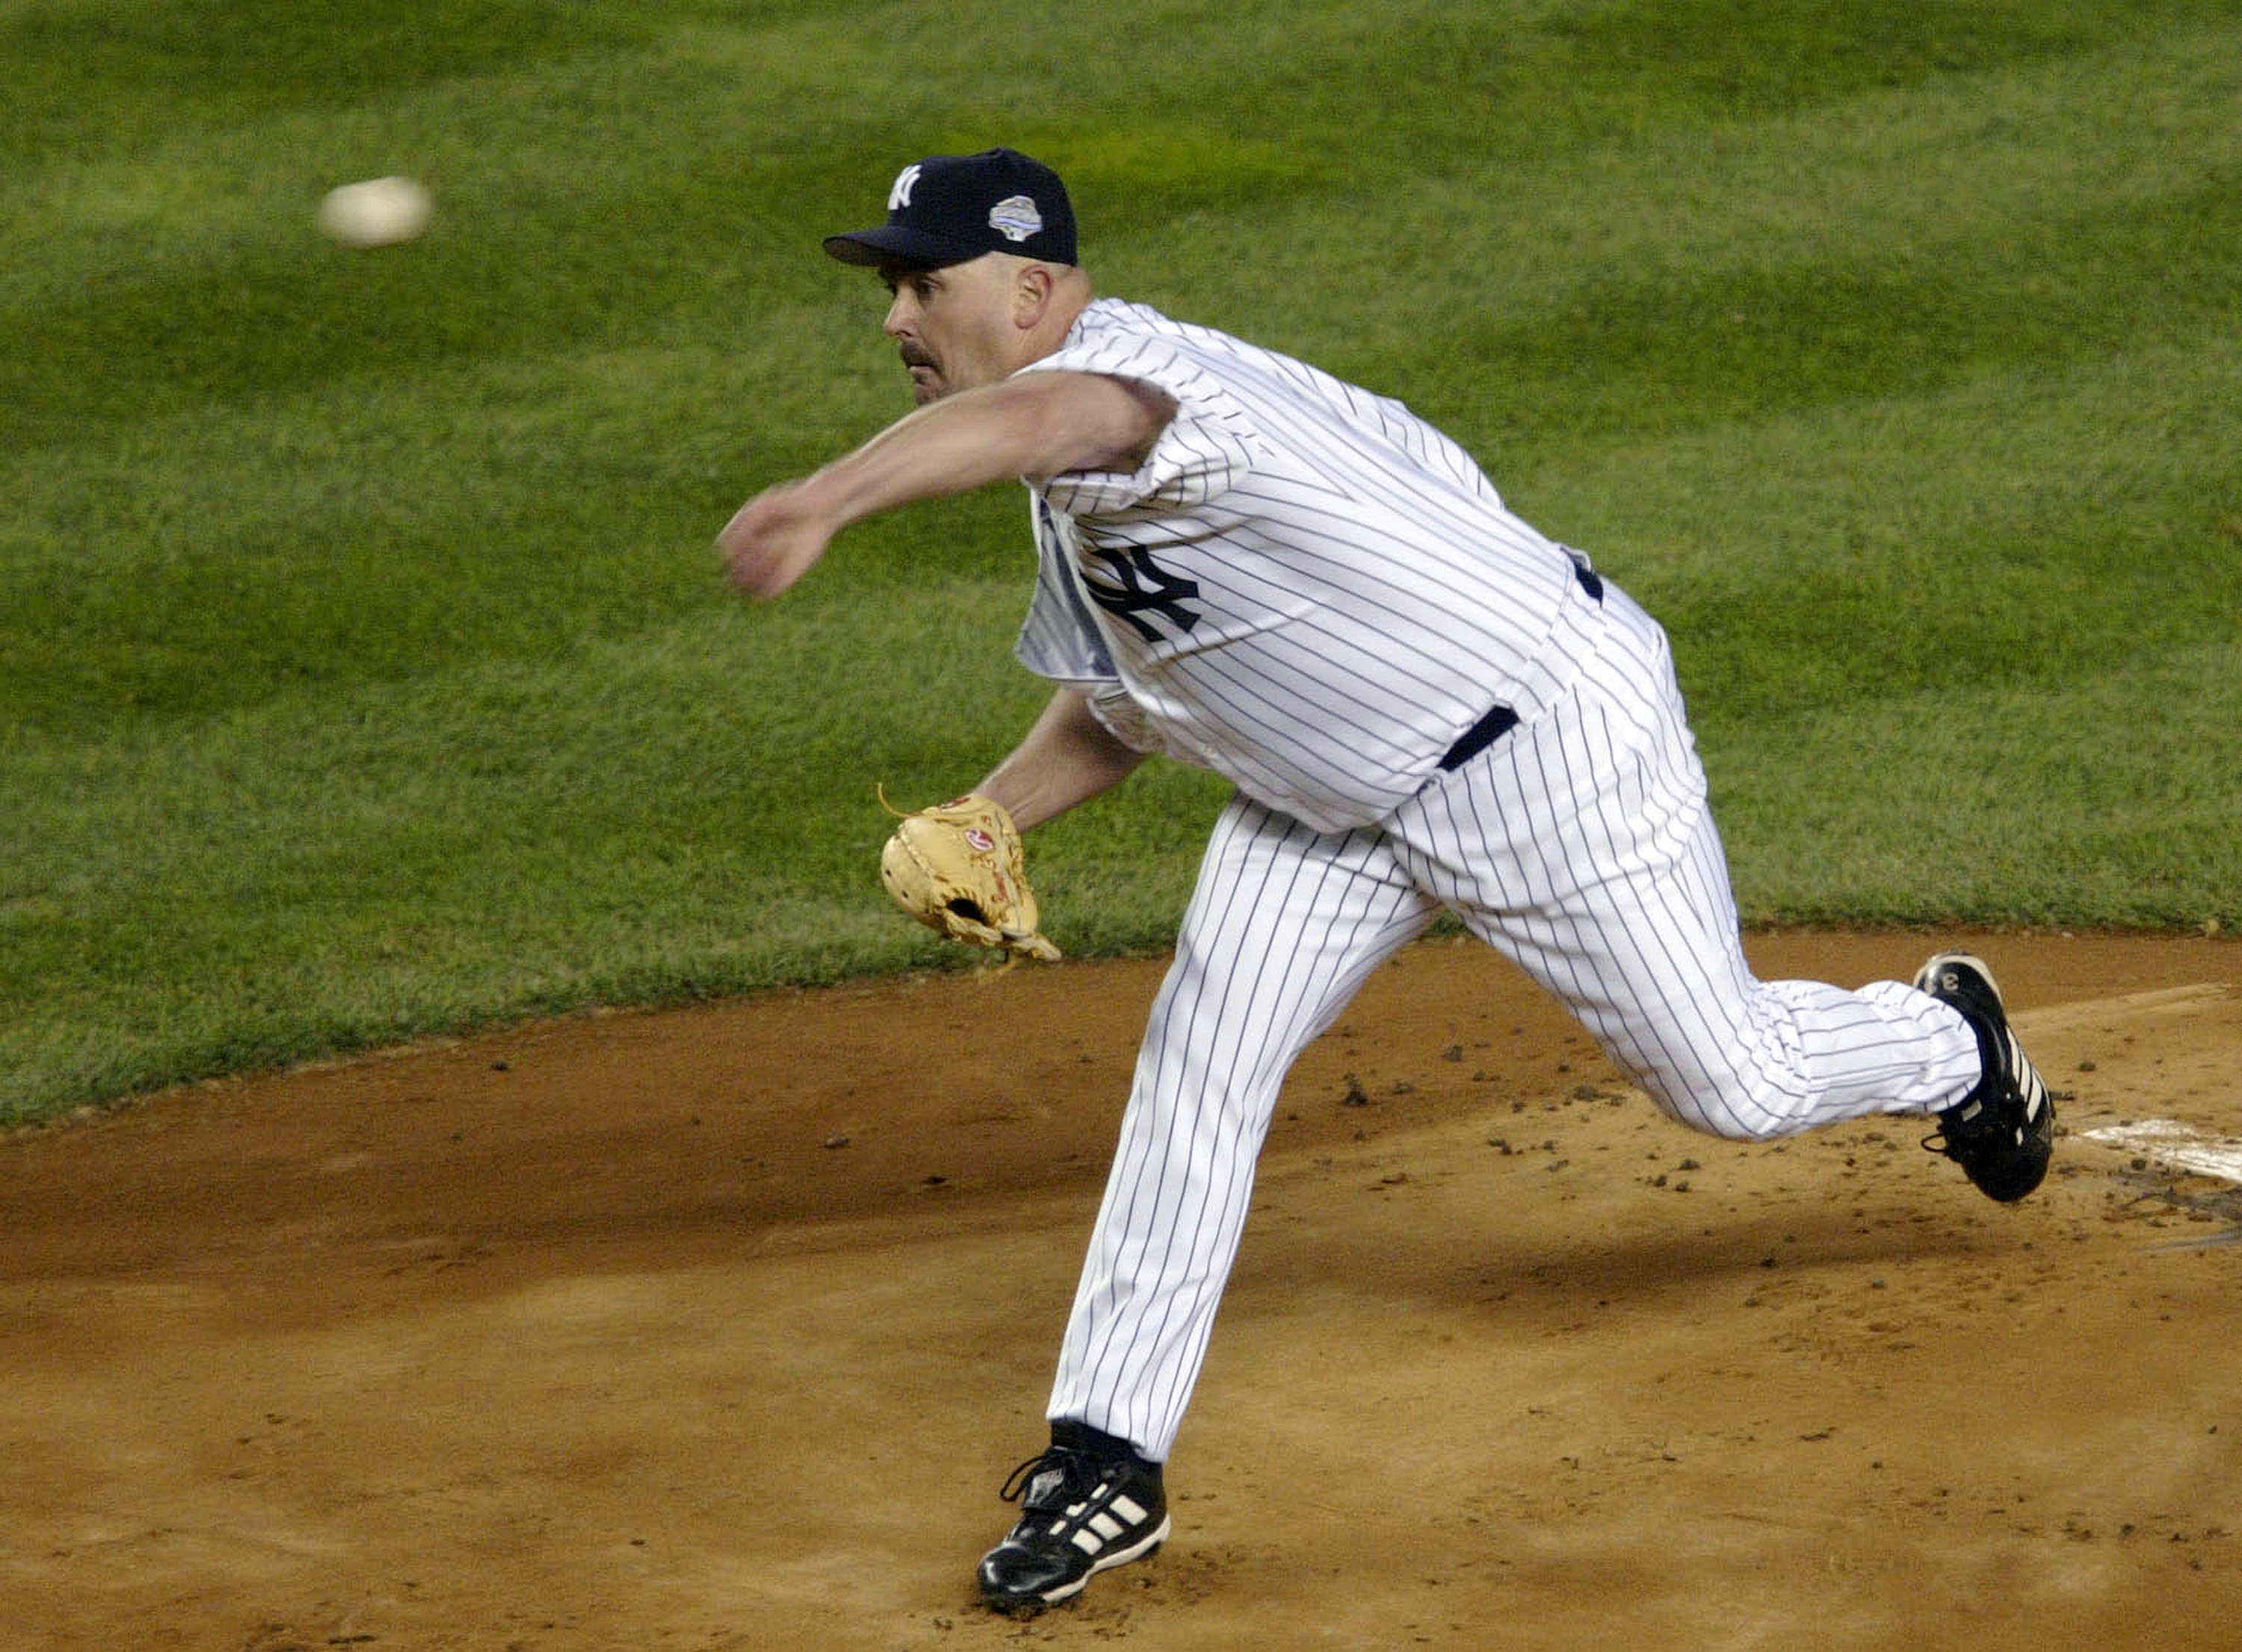 BRONX, NY - OCTOBER 18:  Starting pitcher David Wells #33 of the New York Yankees throws against the Florida Marlins in the first inning during game one of the Major League Baseball World Series October 18, 2003 at Yankee Stadium in the Bronx, New York.